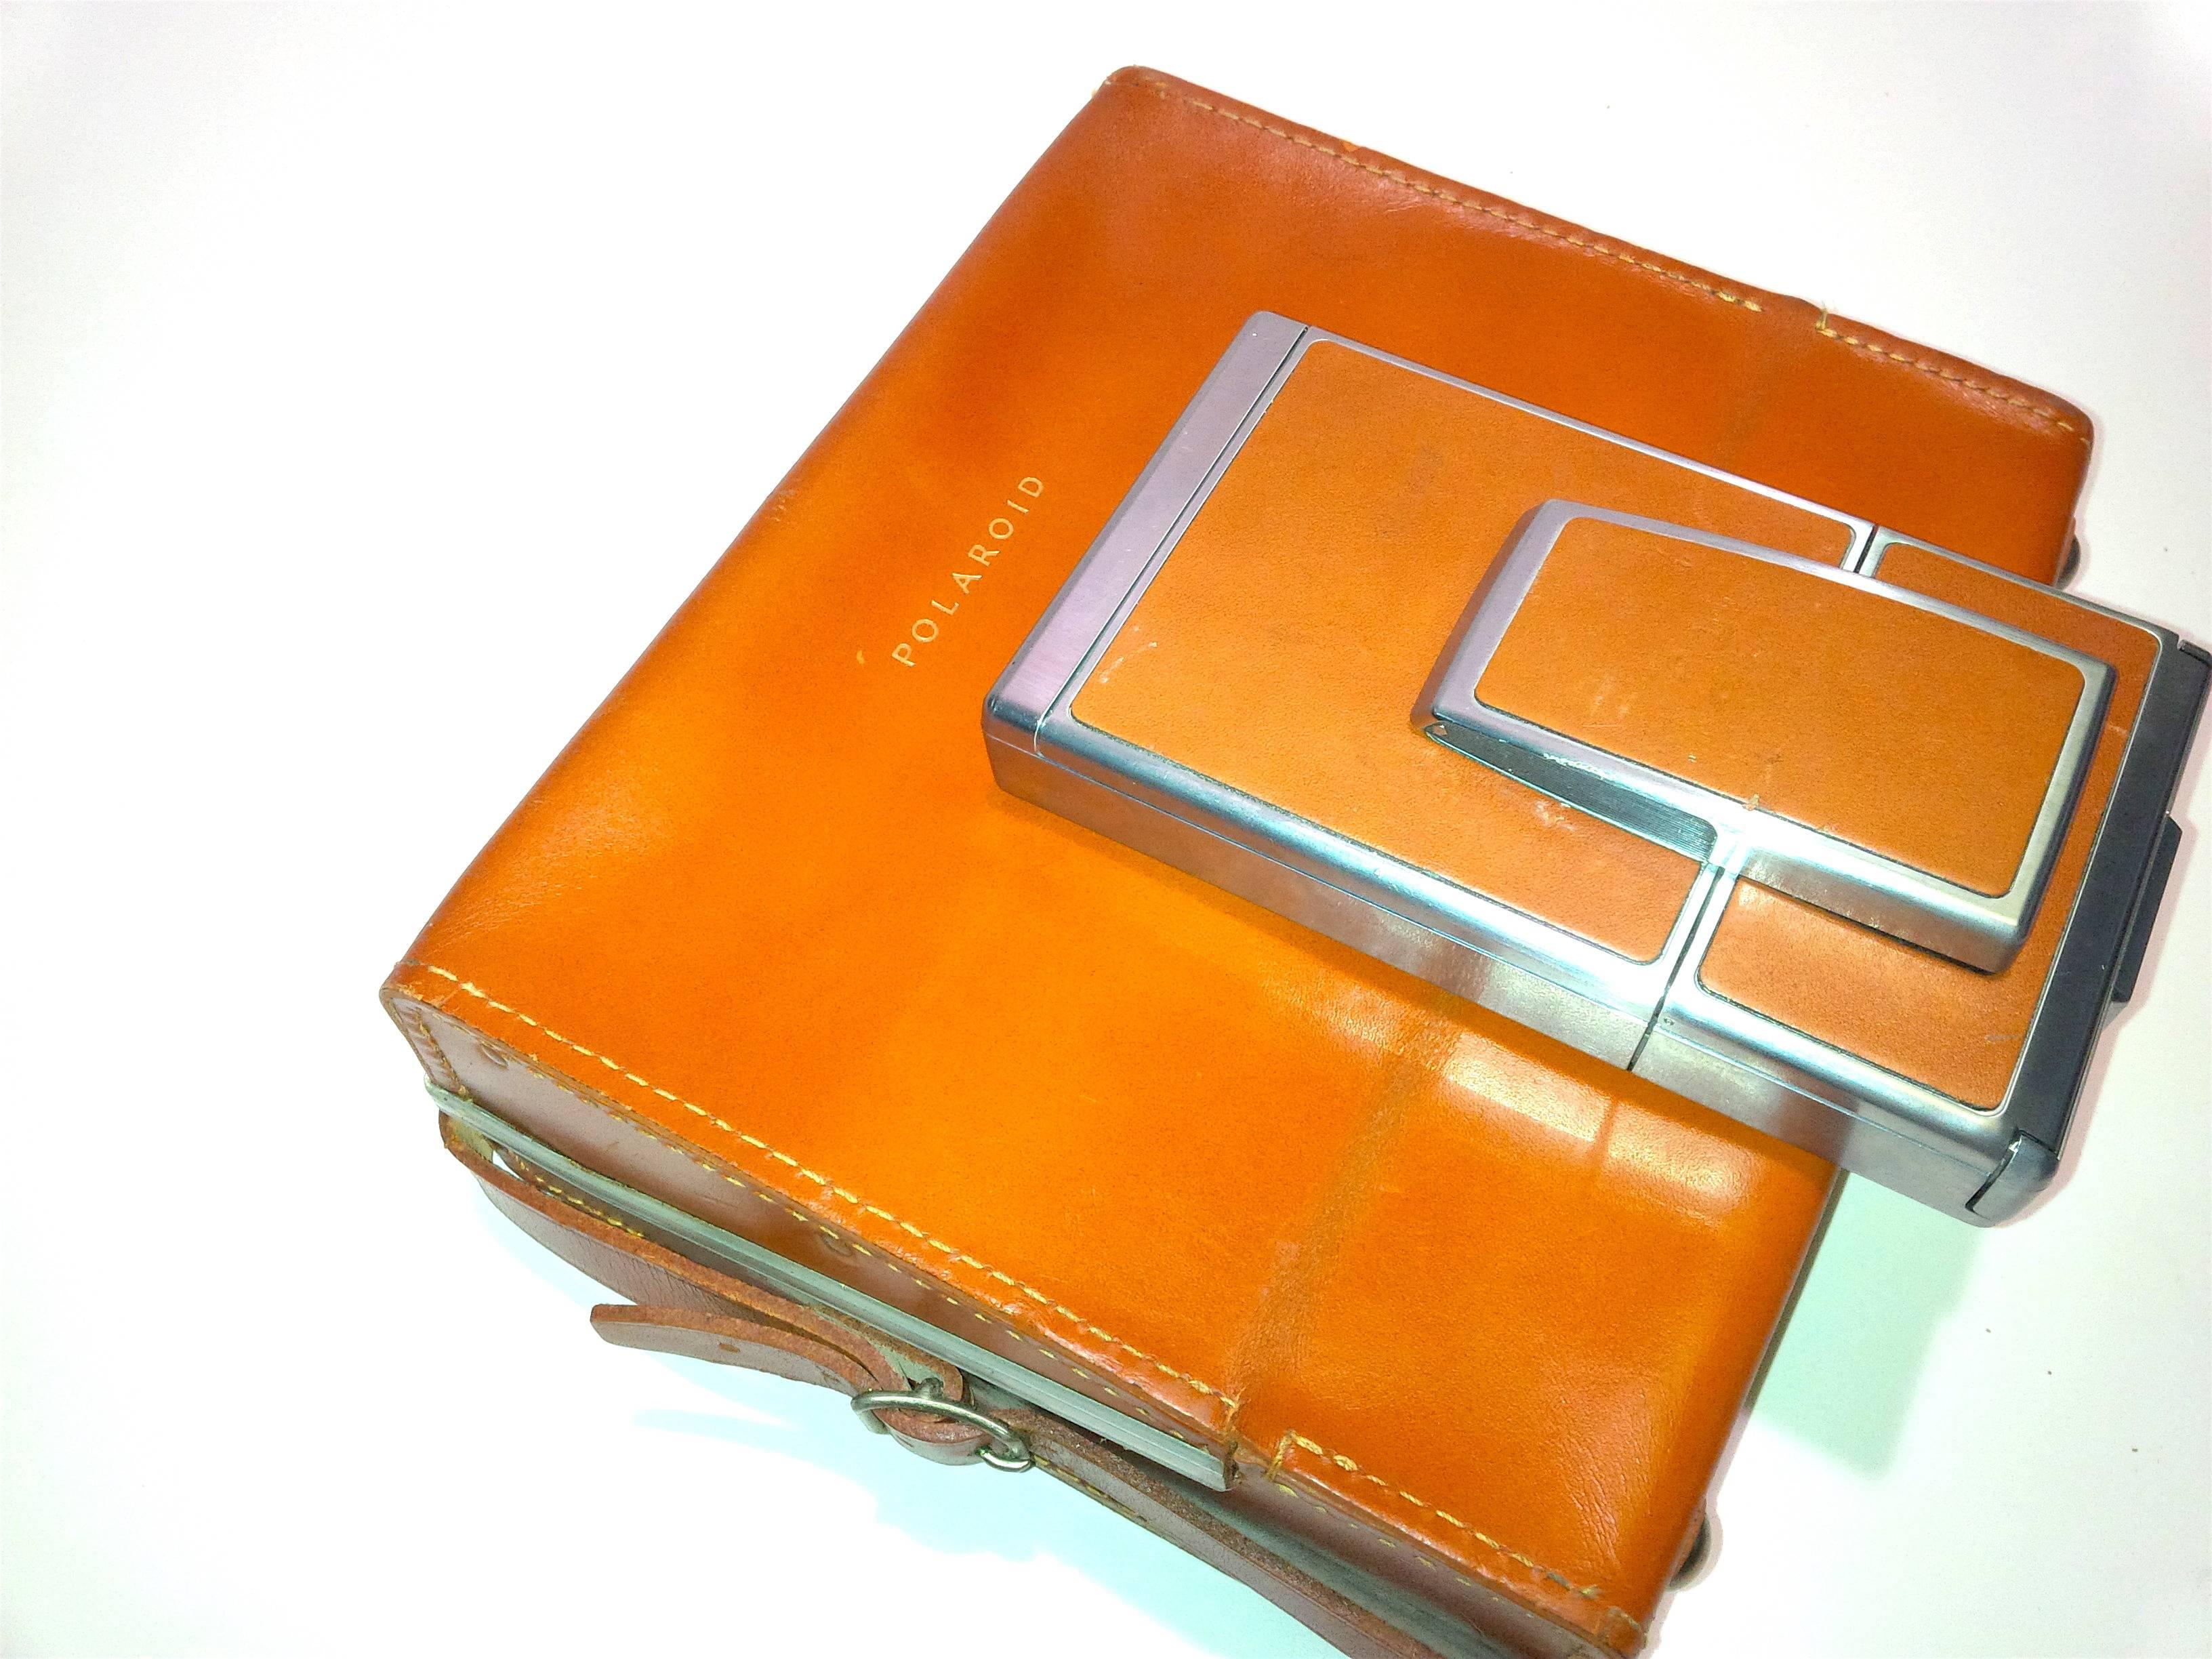 Futurist Iconic Polaroid SX-70 Leather Bound. Early Cult Camera / Leather Case